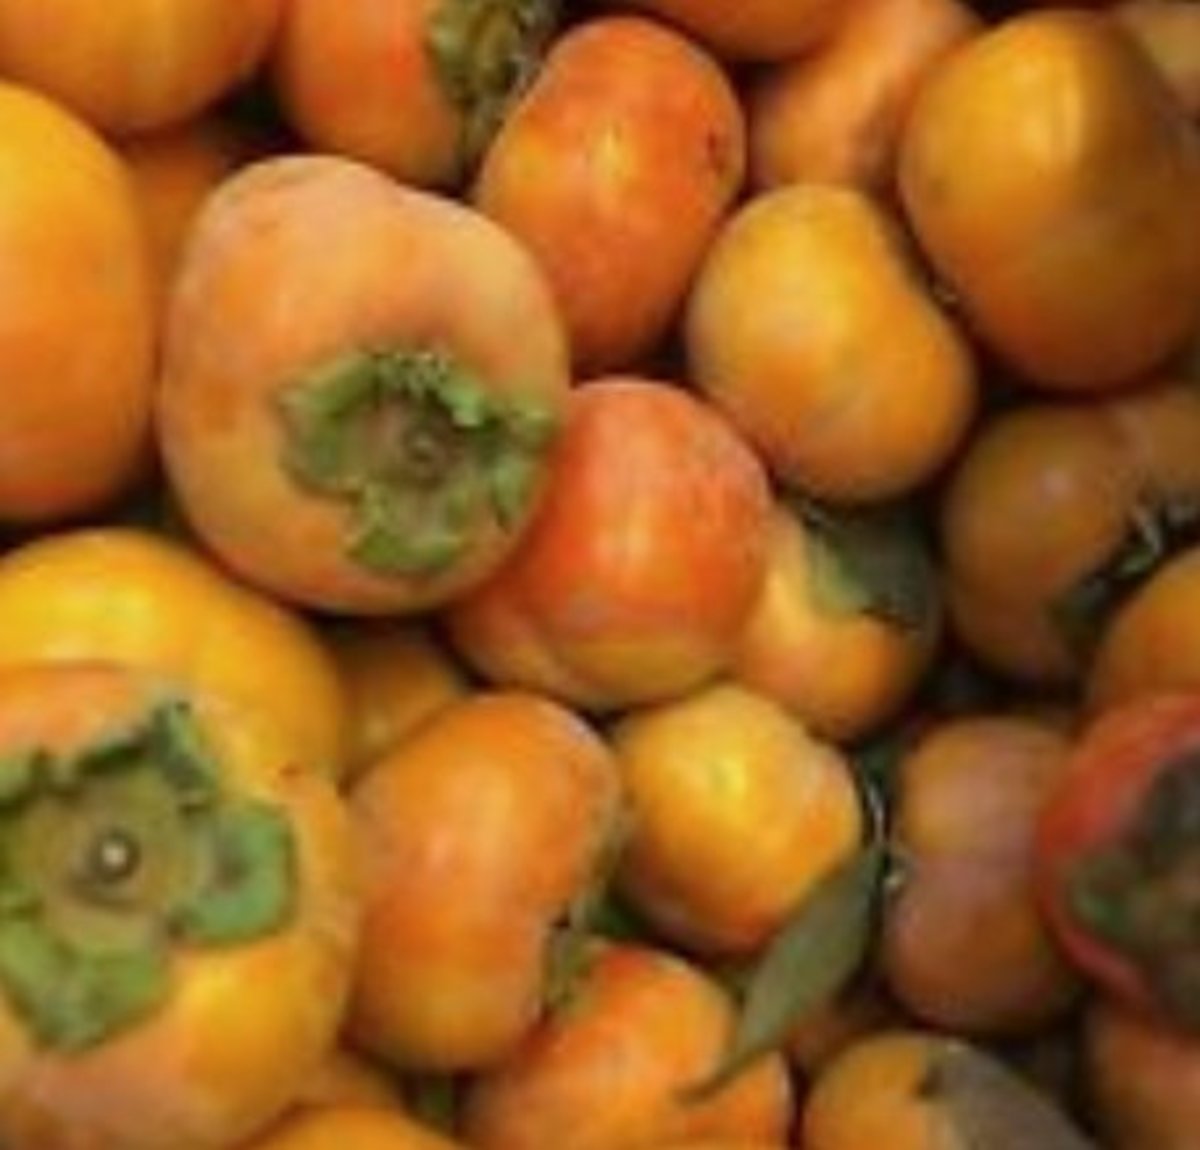 Persimmons, a favorite food of Pocahontas